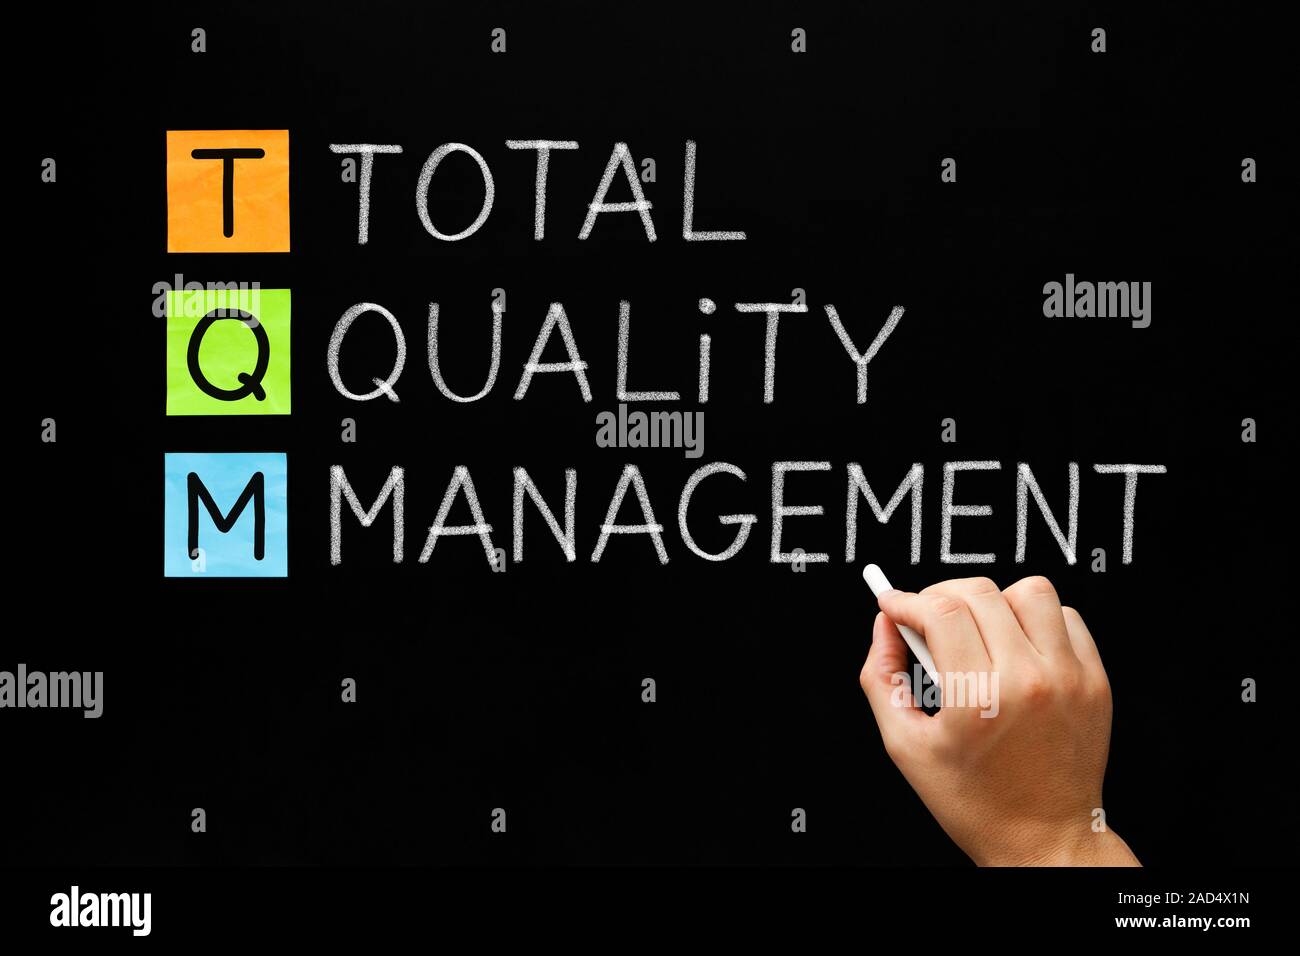 Hand writing acronym TQM Total Quality Management concept with white chalk on blackboard. Stock Photo